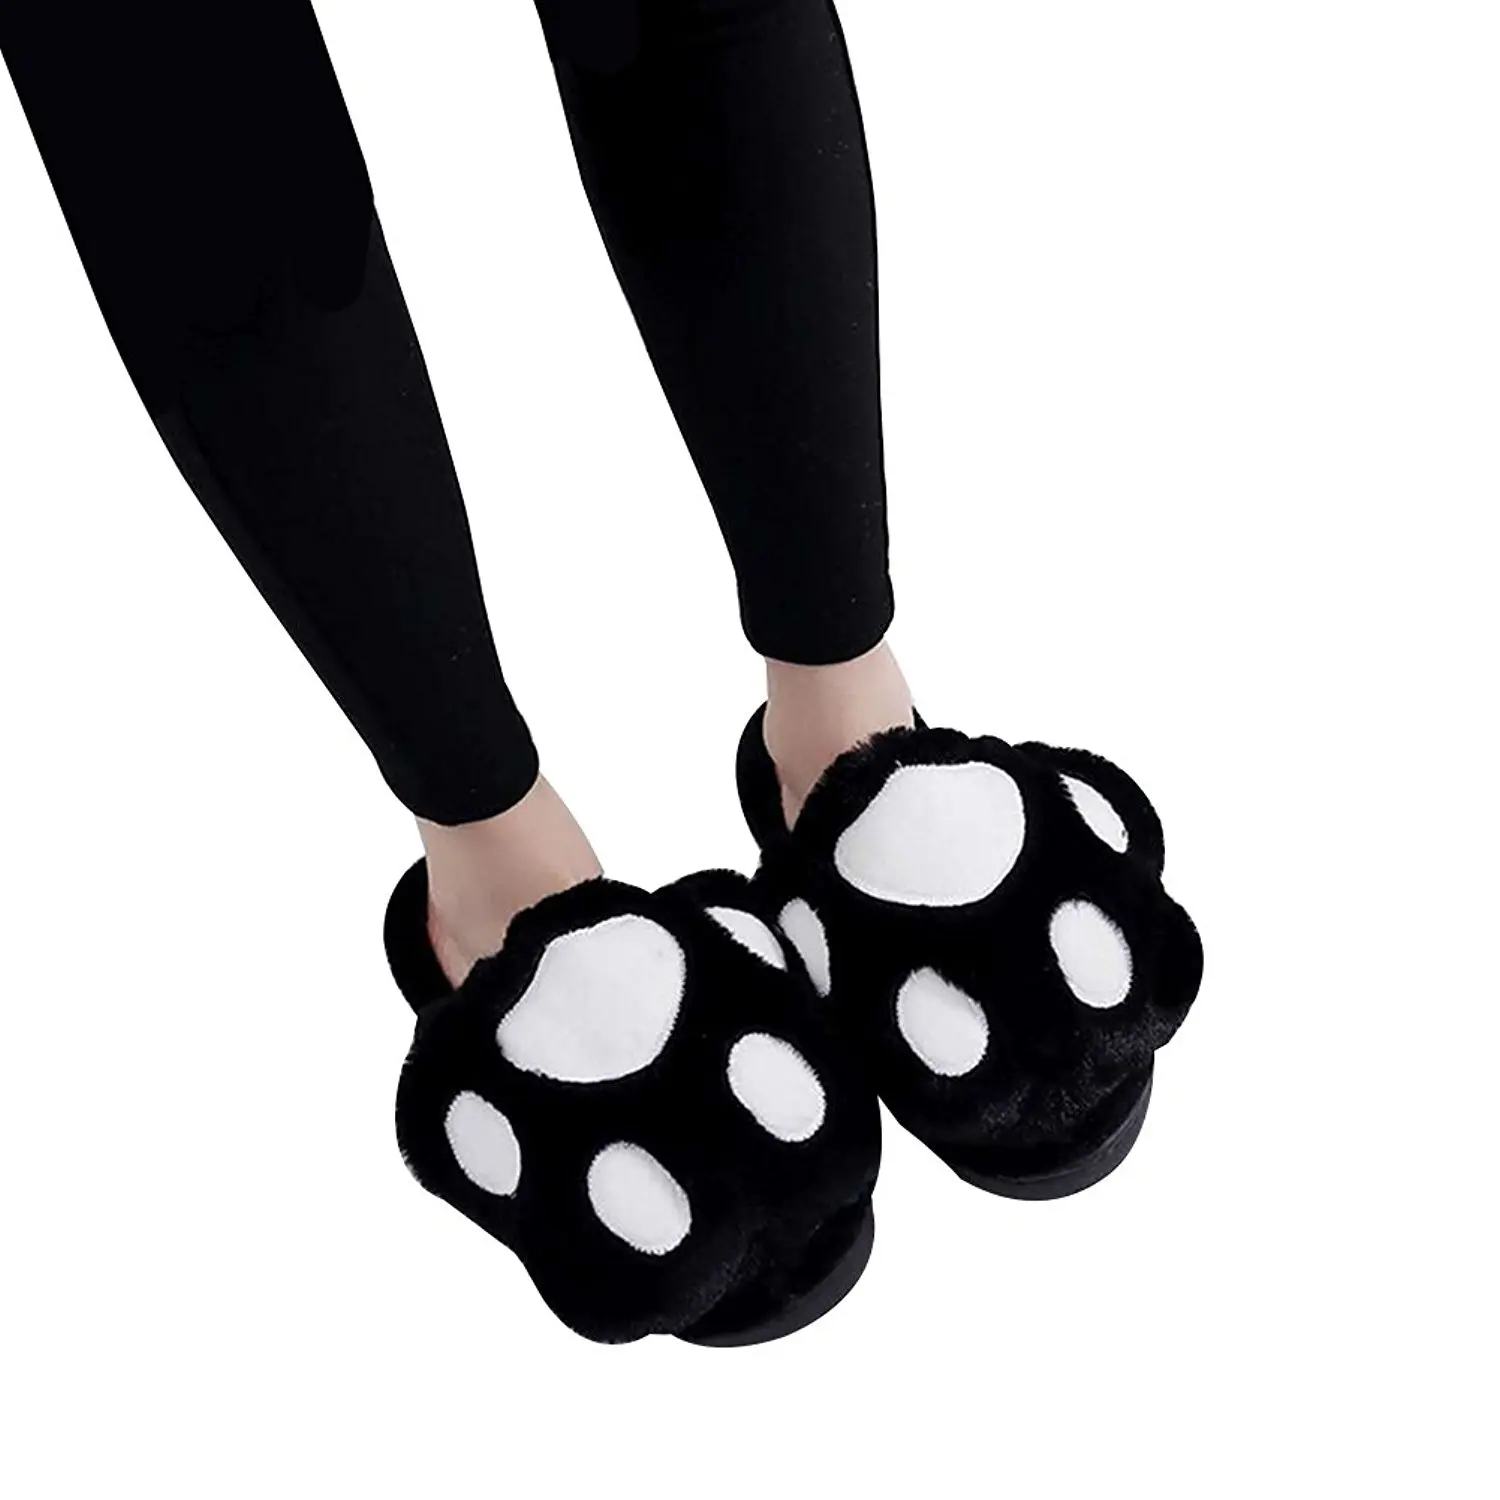 bear claw slippers